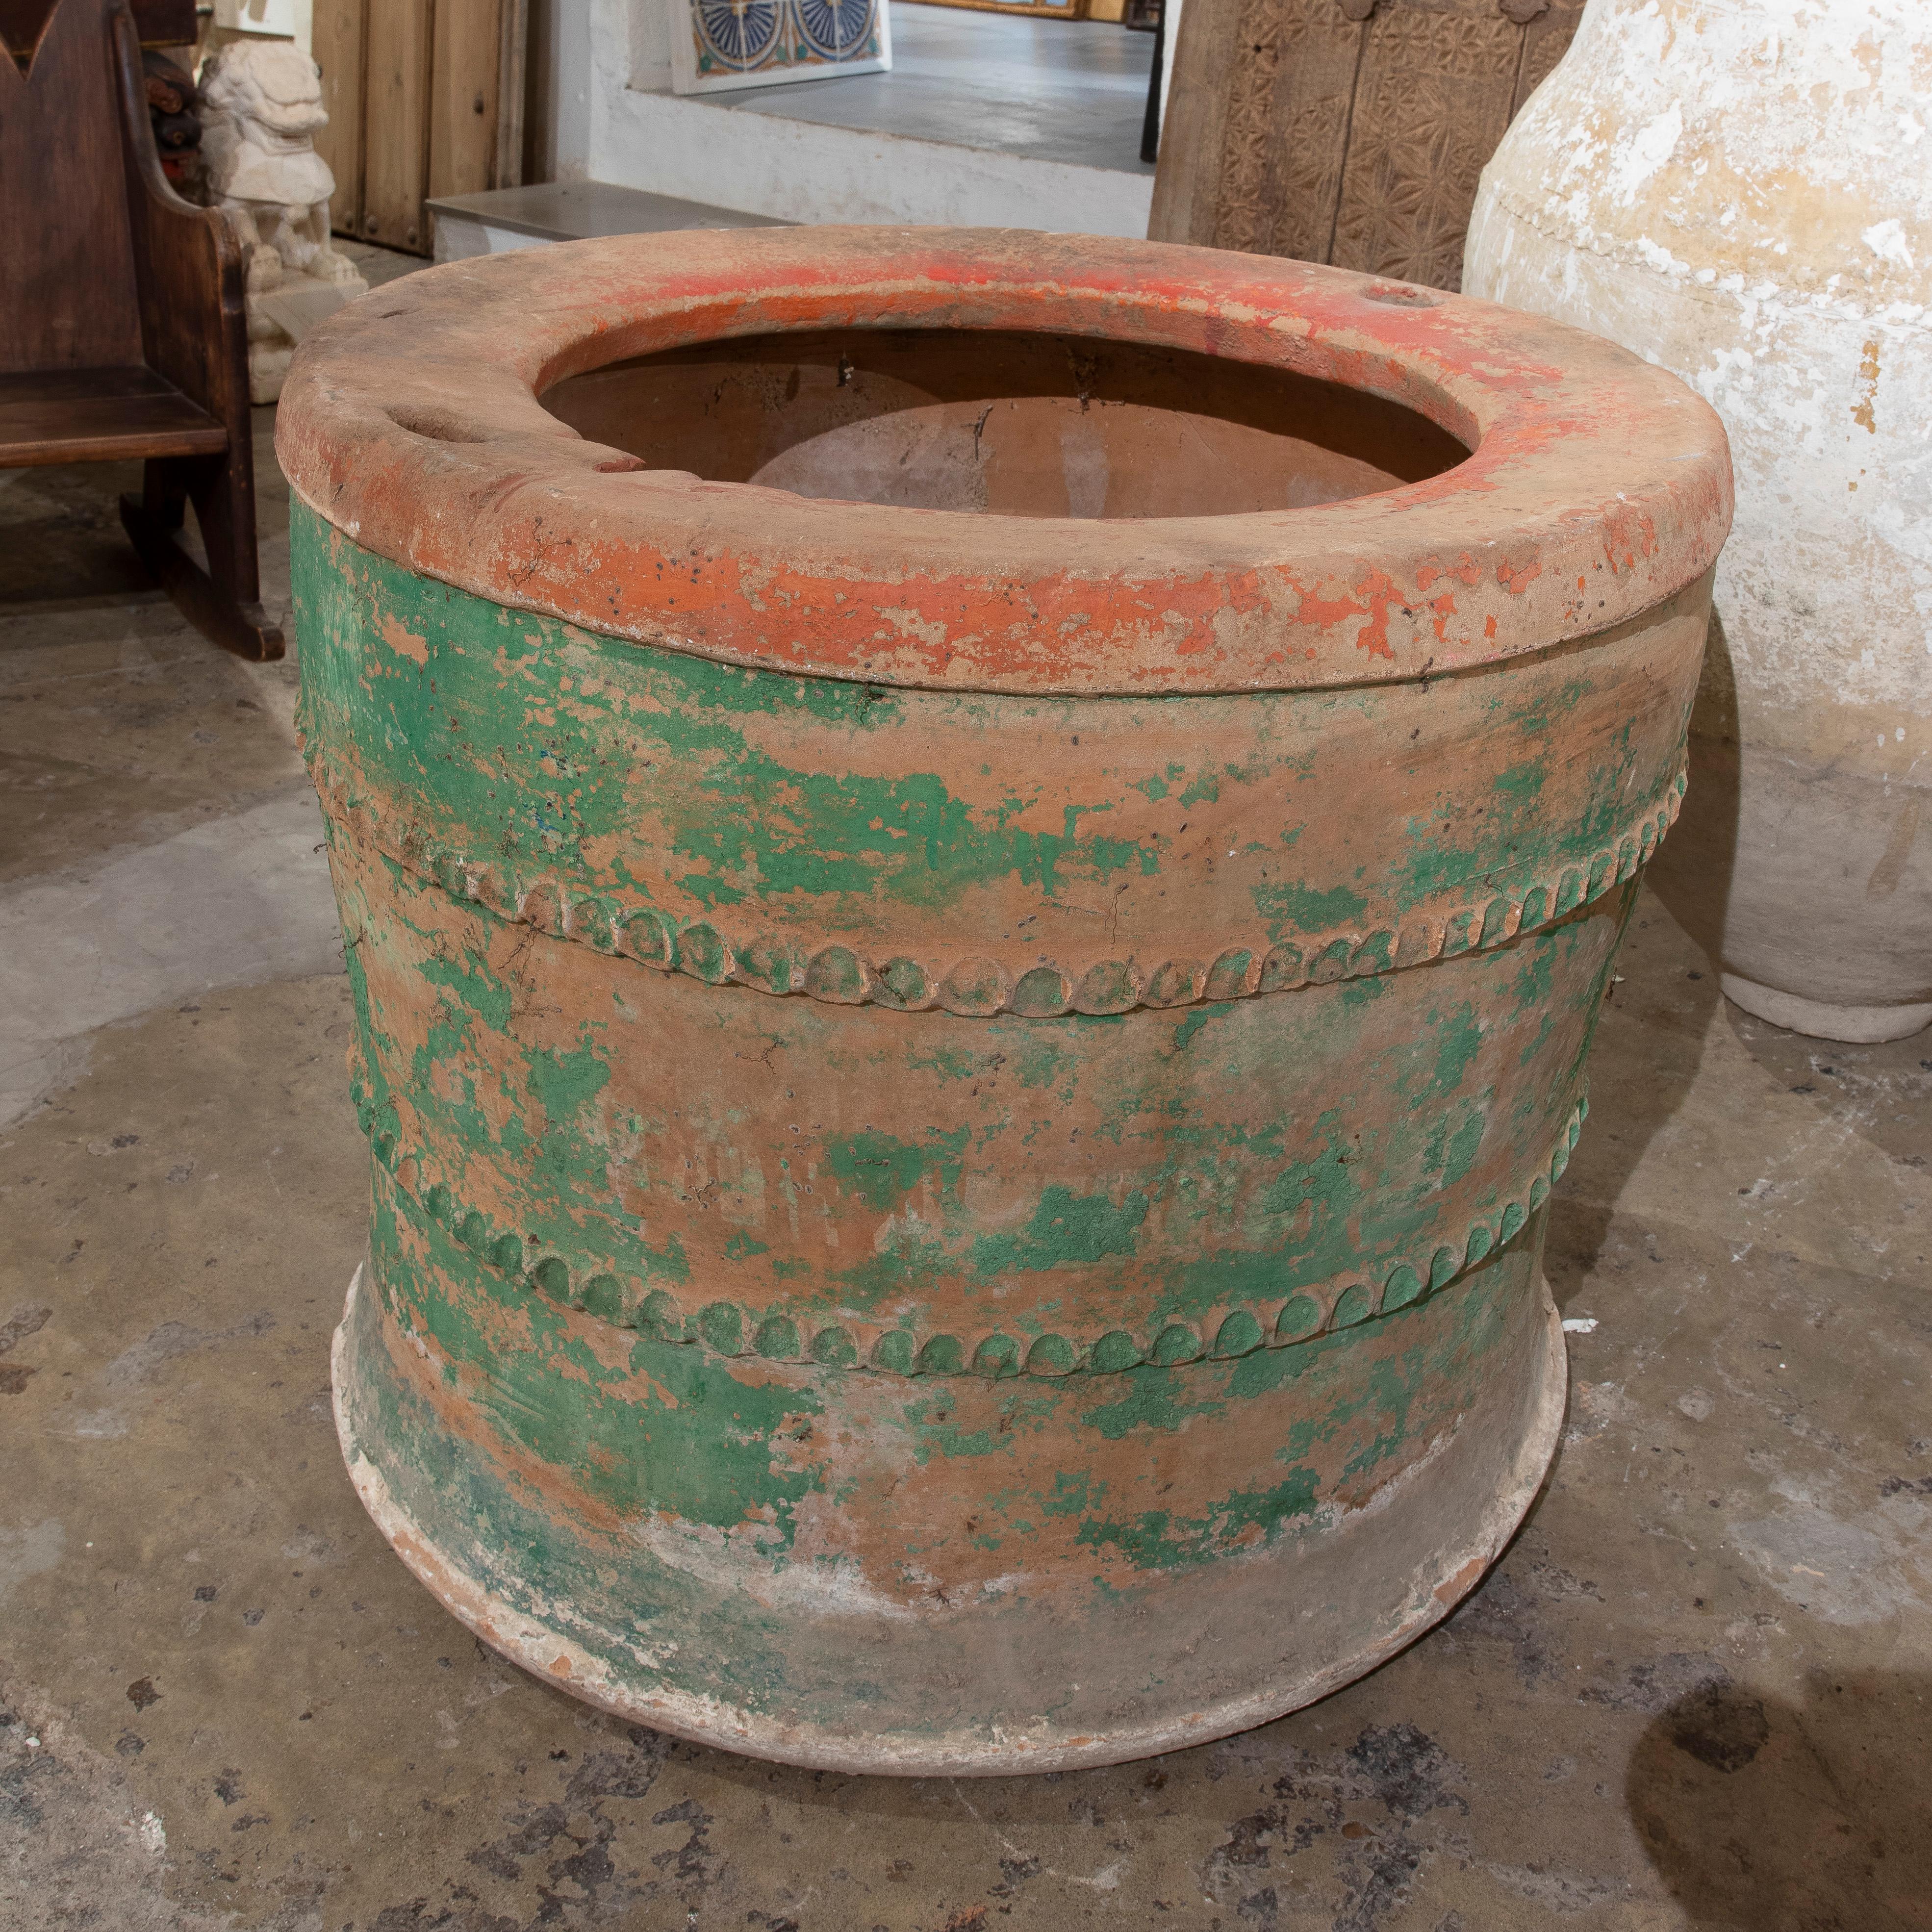 Antique mit-19th century Spanish terracotta earthenware water well with traditional rings decoration.